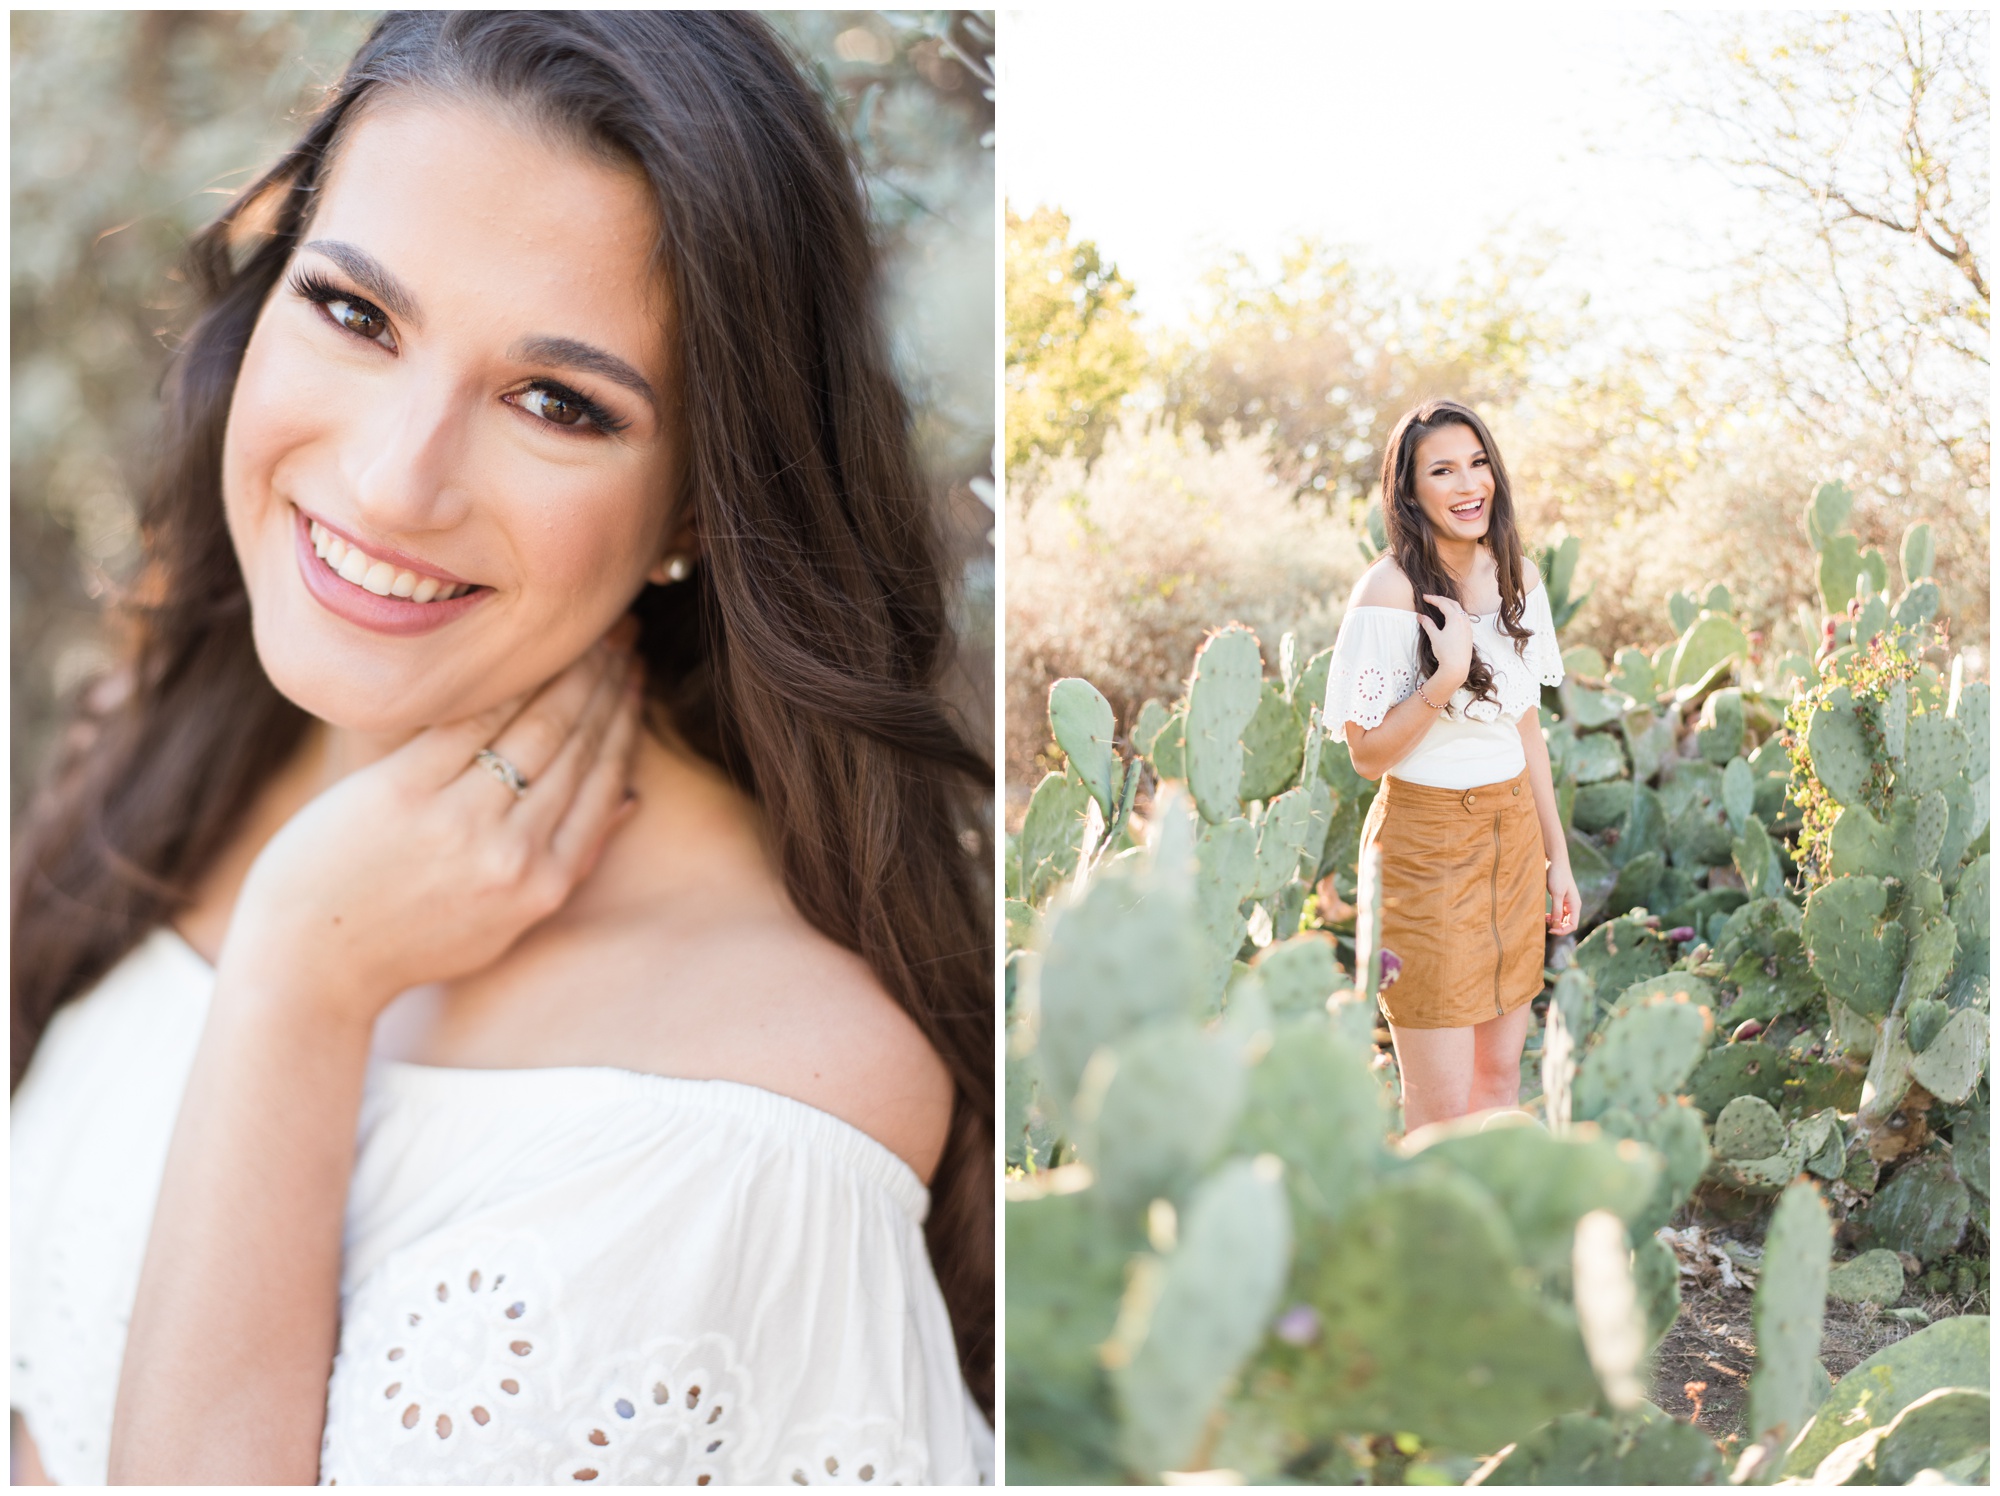 Fort Worth Senior Photographer | Fort Worth Stockyards | Fort Worth Airfield Falls and Conservation Park | Lauren Grimes Photography | Nazarene Christian Academy